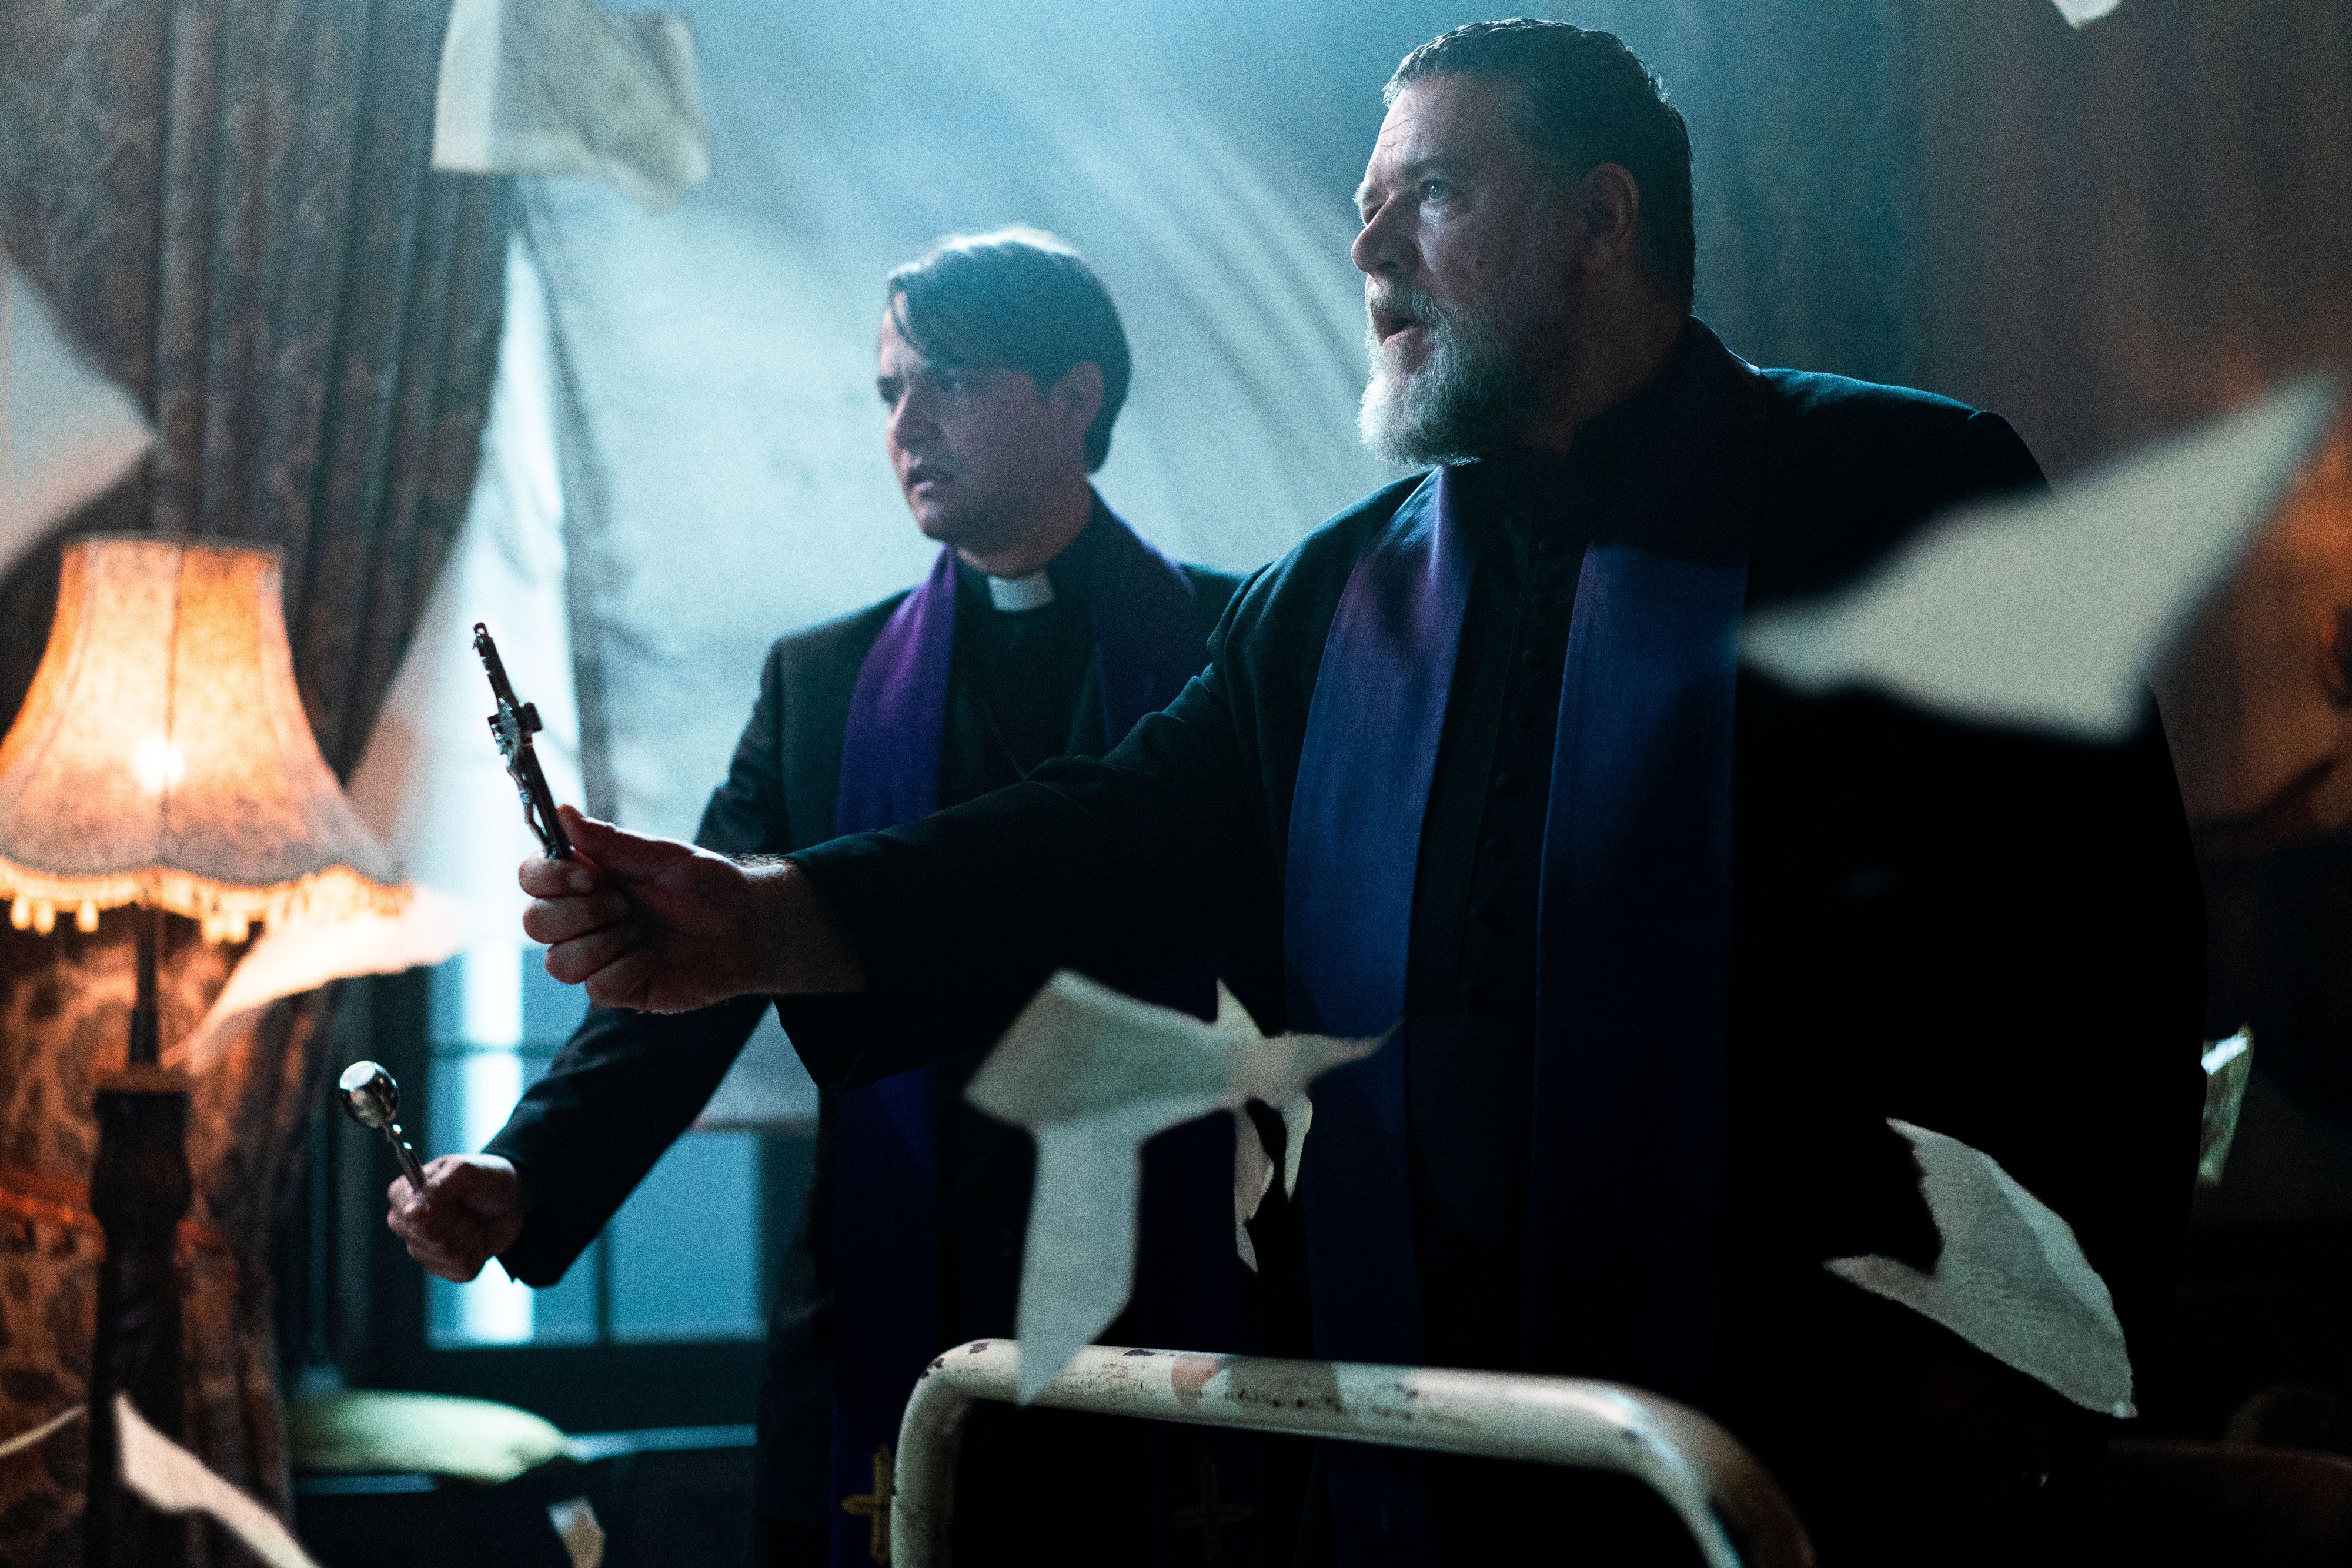 Russell Crowe Is Good, But The Pope's Exorcist Is a Big Joke